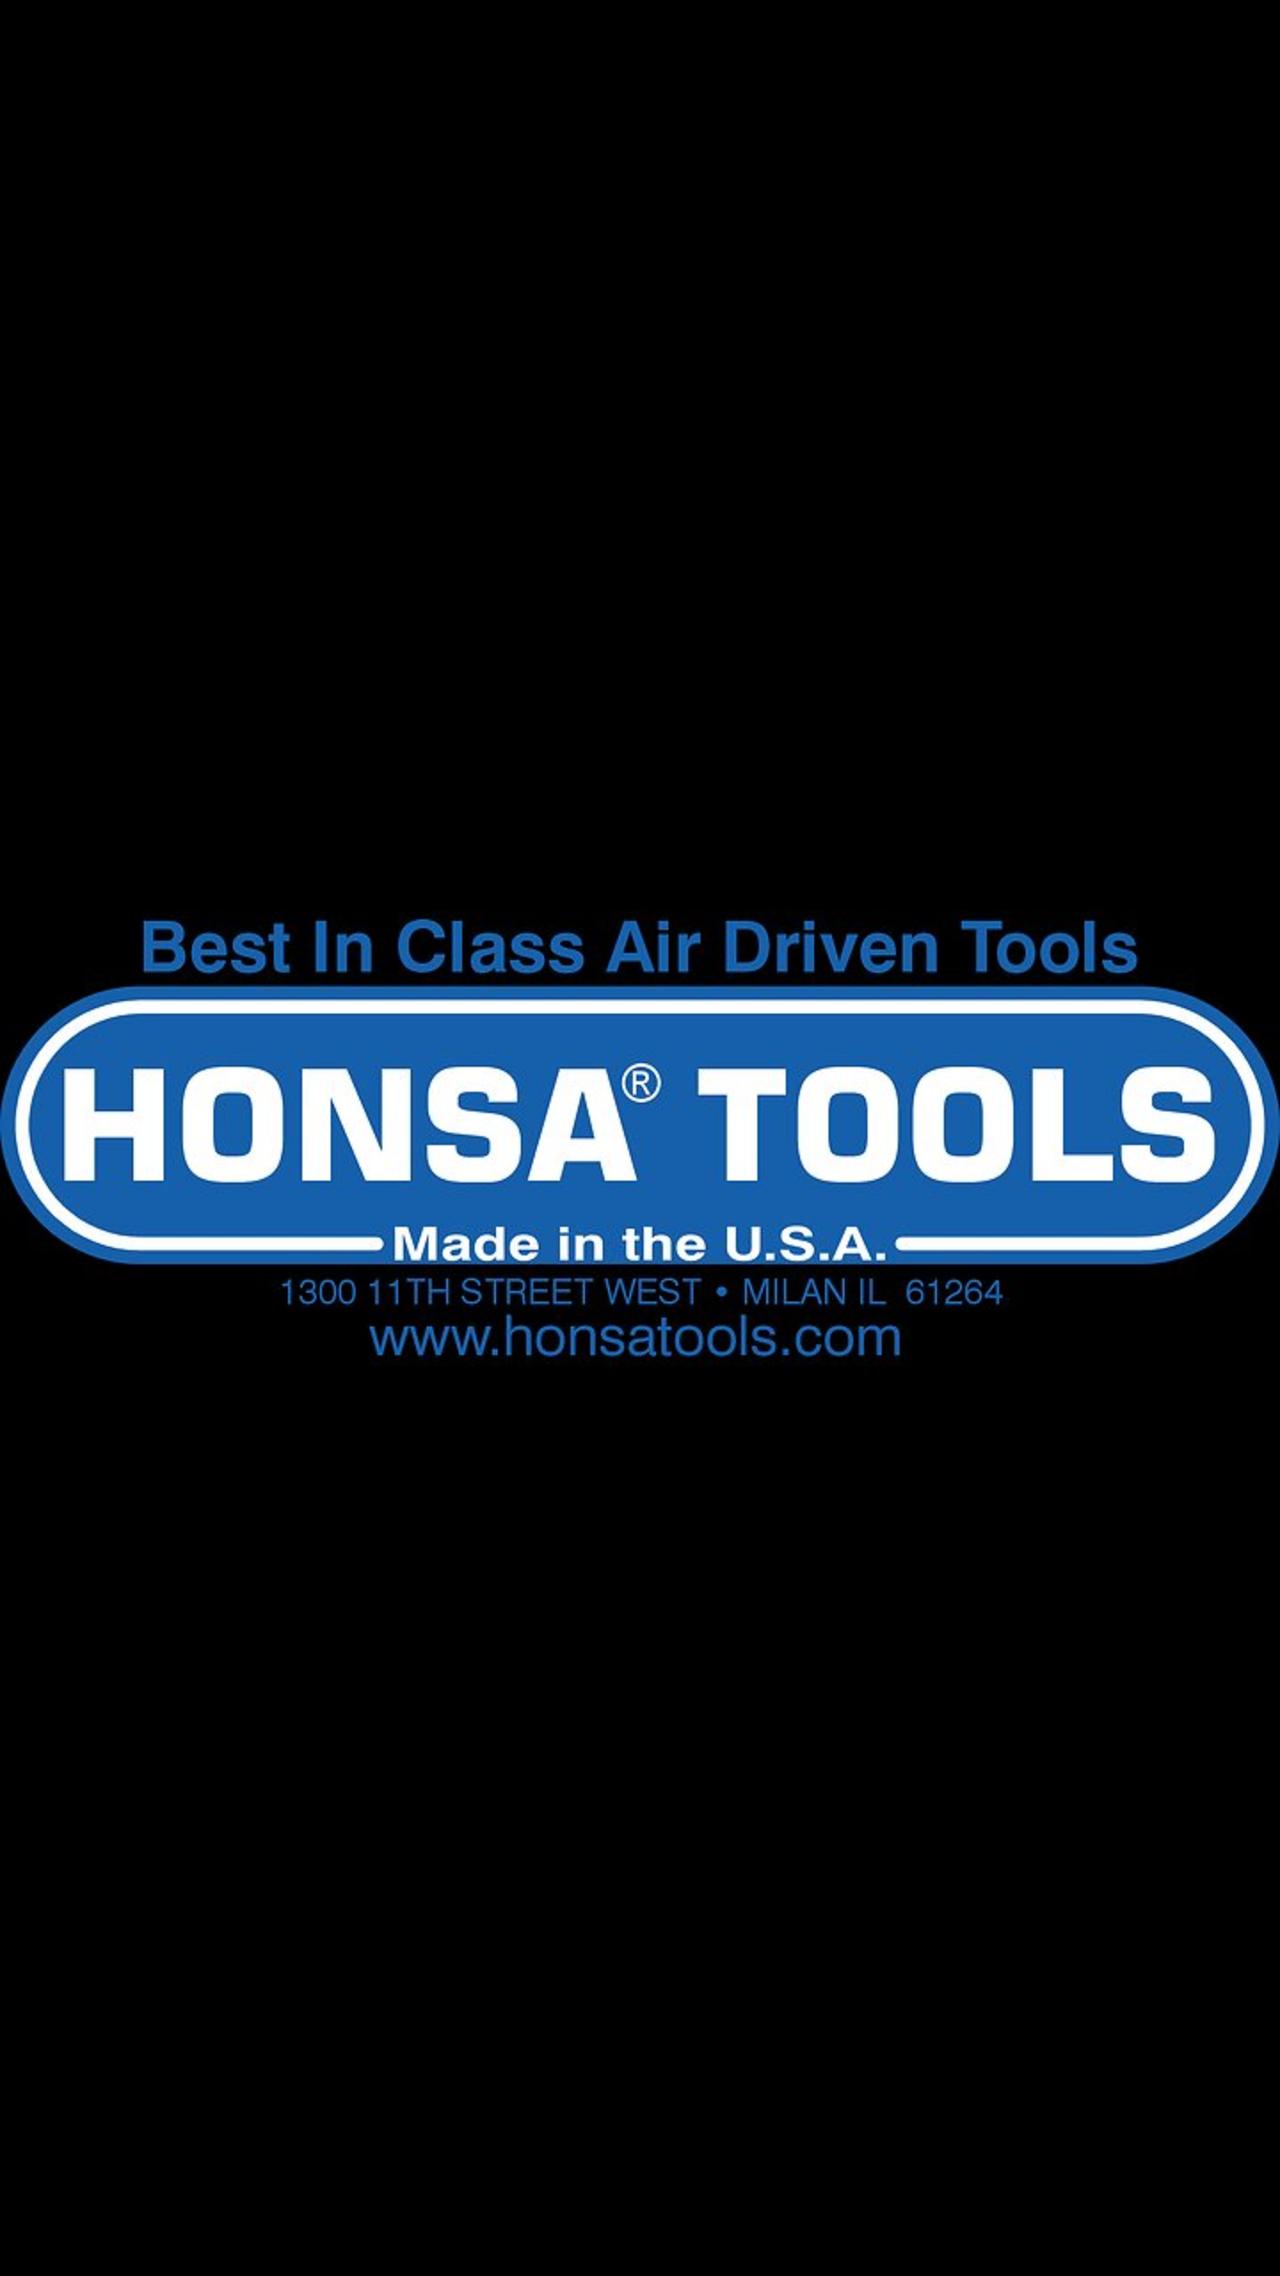 Honsa Tools - HTP 85 Goose Neck Handle Air Tool is Made in the USA